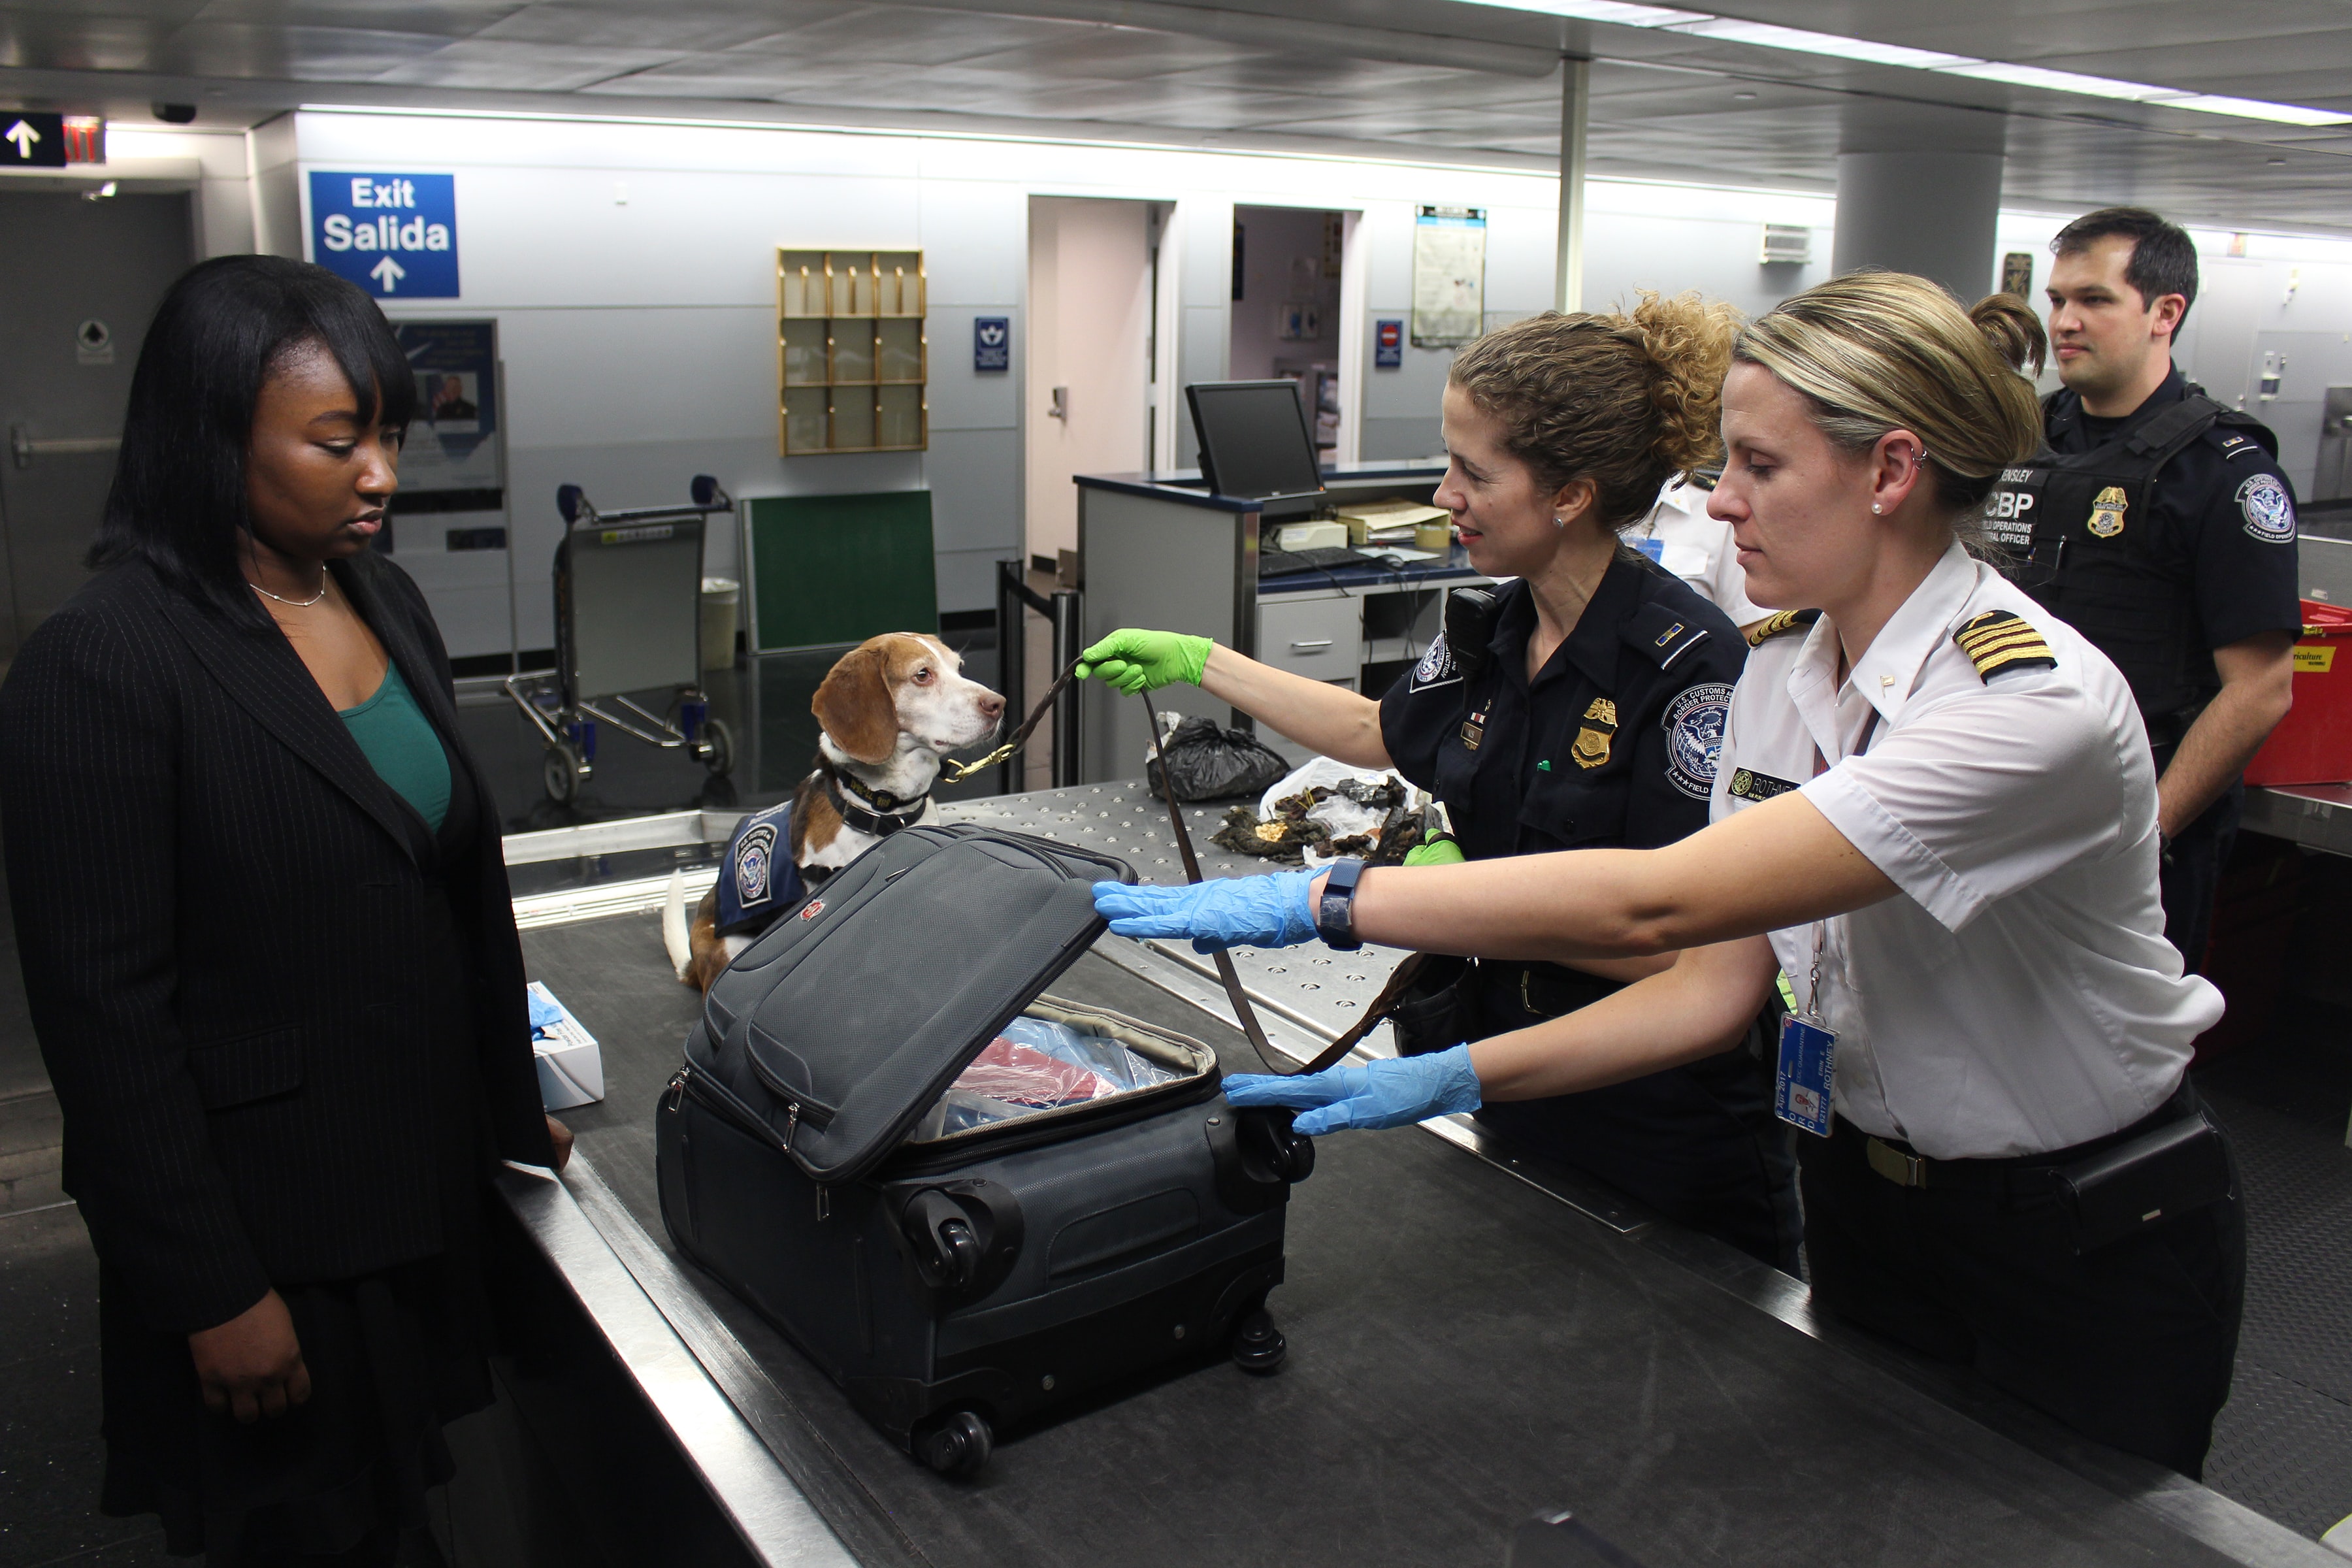 A suitcase and a dog going through airport security